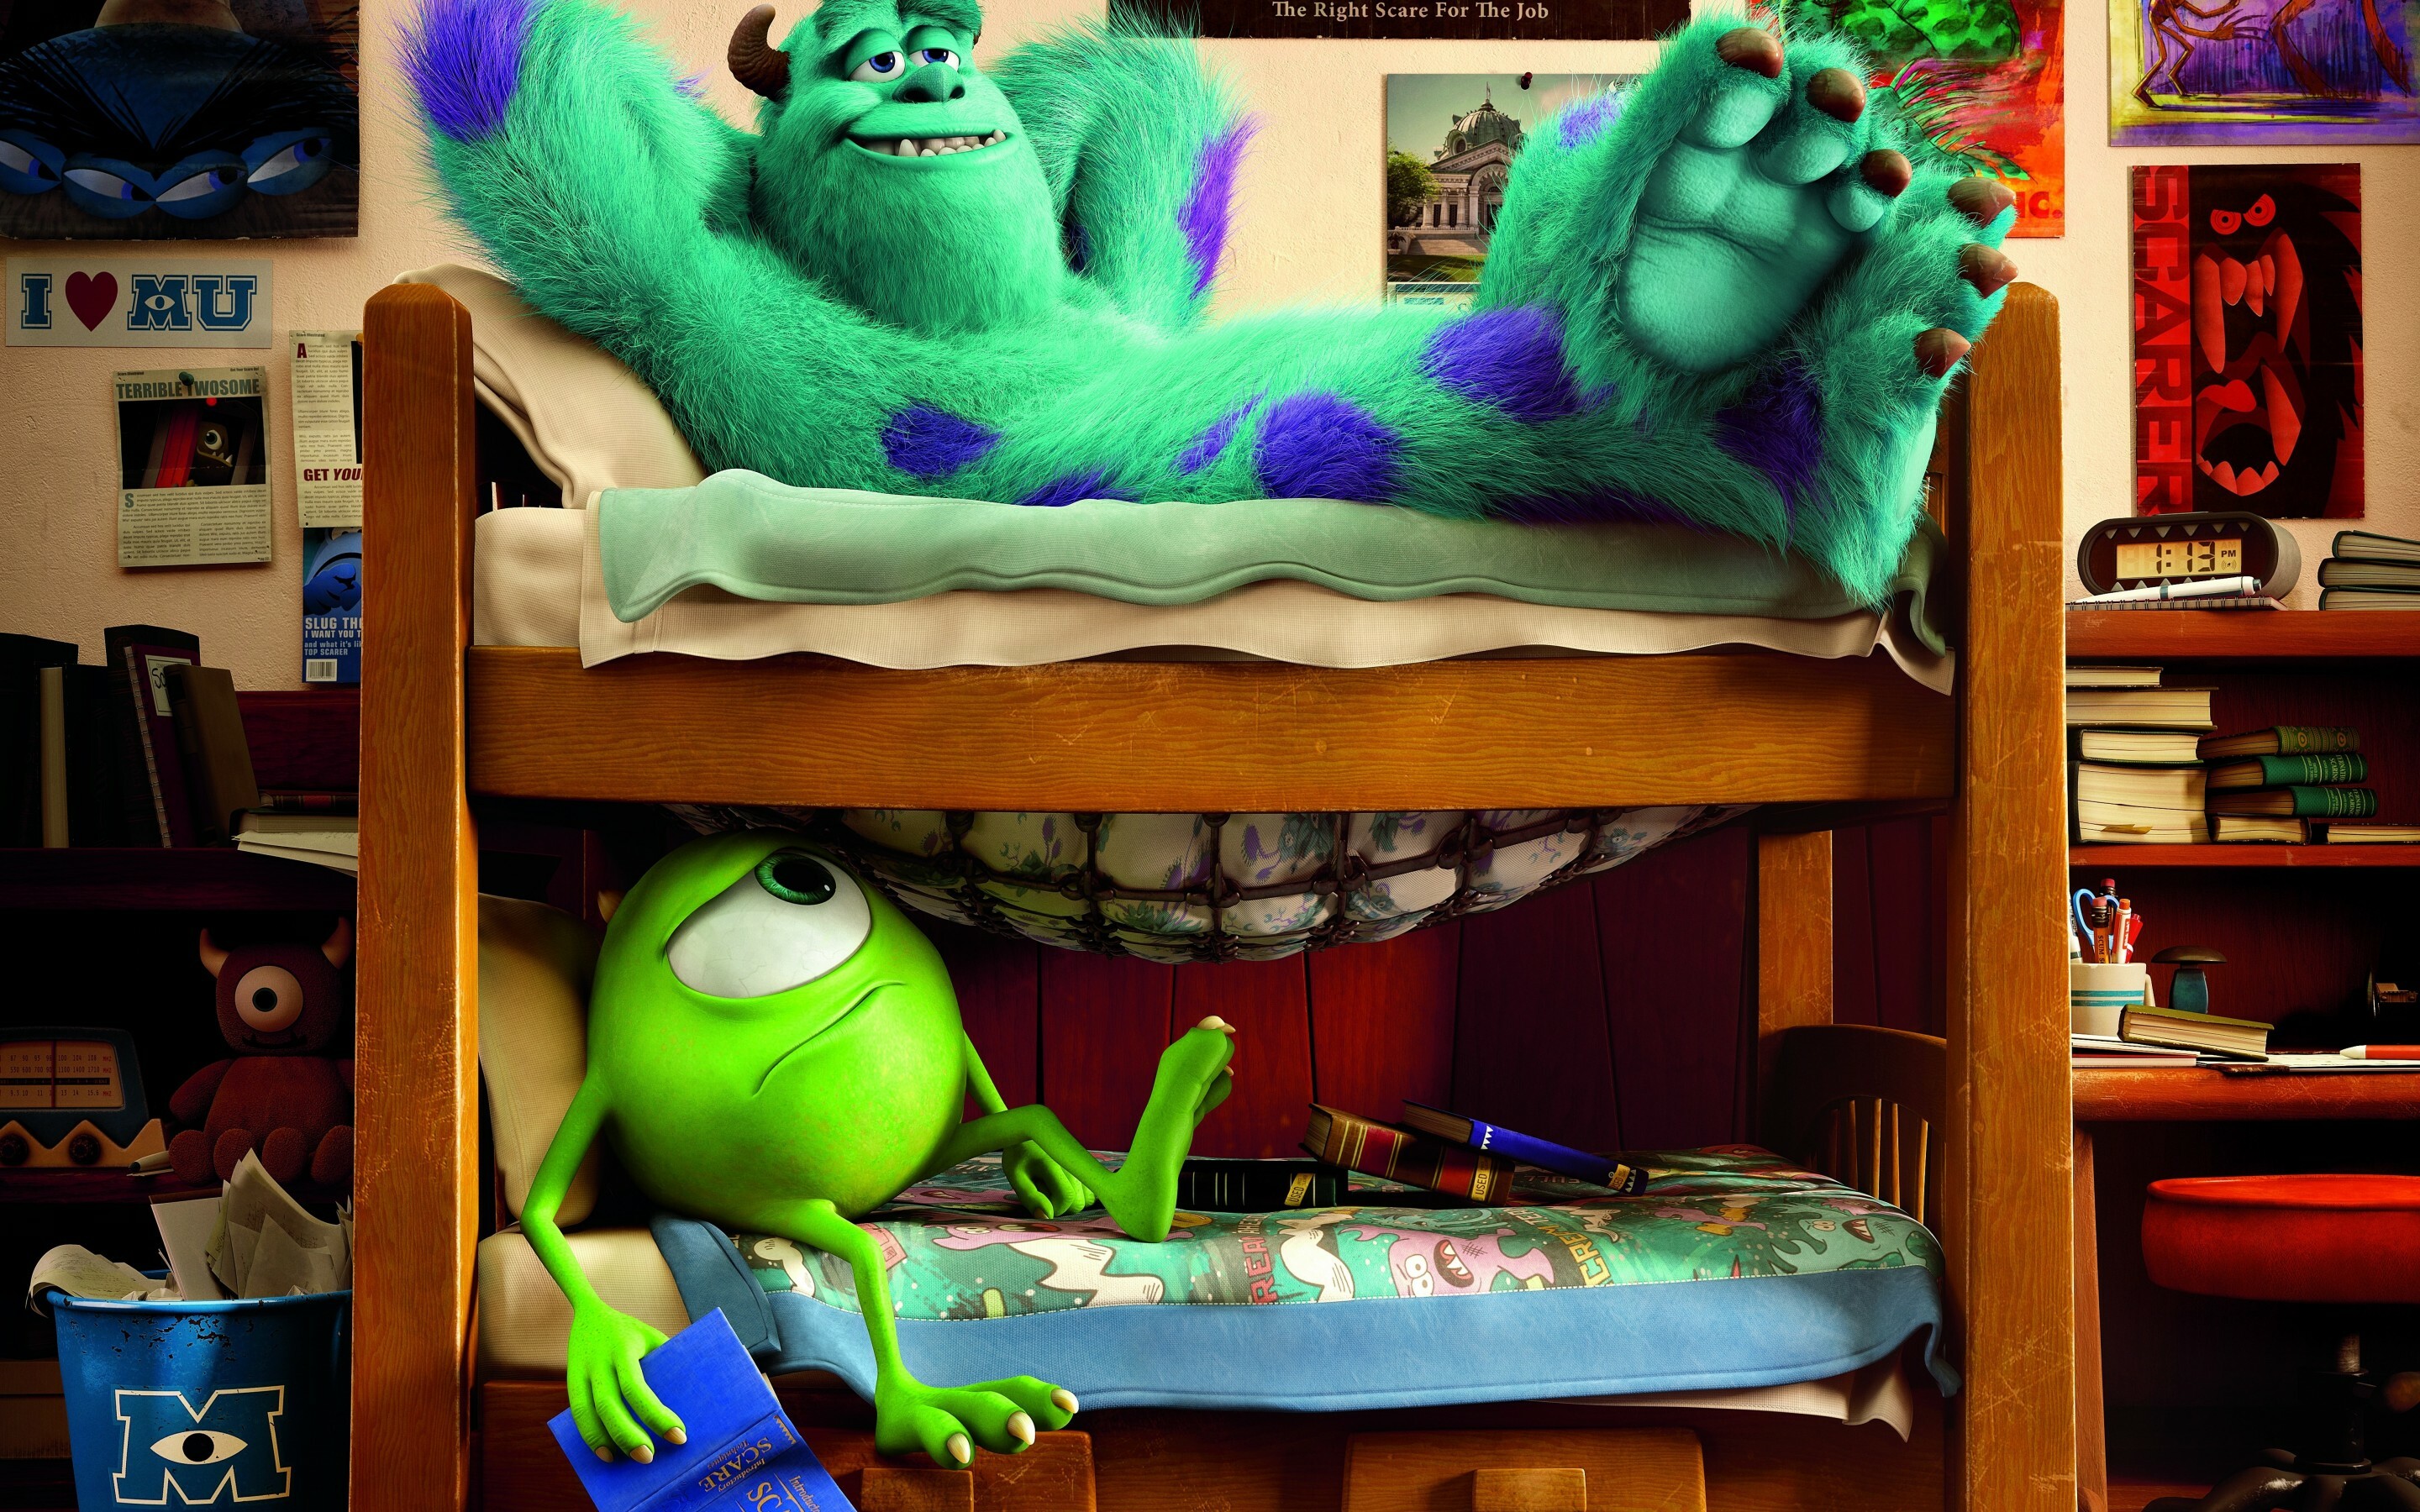 Monsters, Inc.: The film centers on two creatures, the hairy James P. "Sulley" Sullivan and his one-eyed partner and best friend Mike Wazowski. 2880x1800 HD Wallpaper.